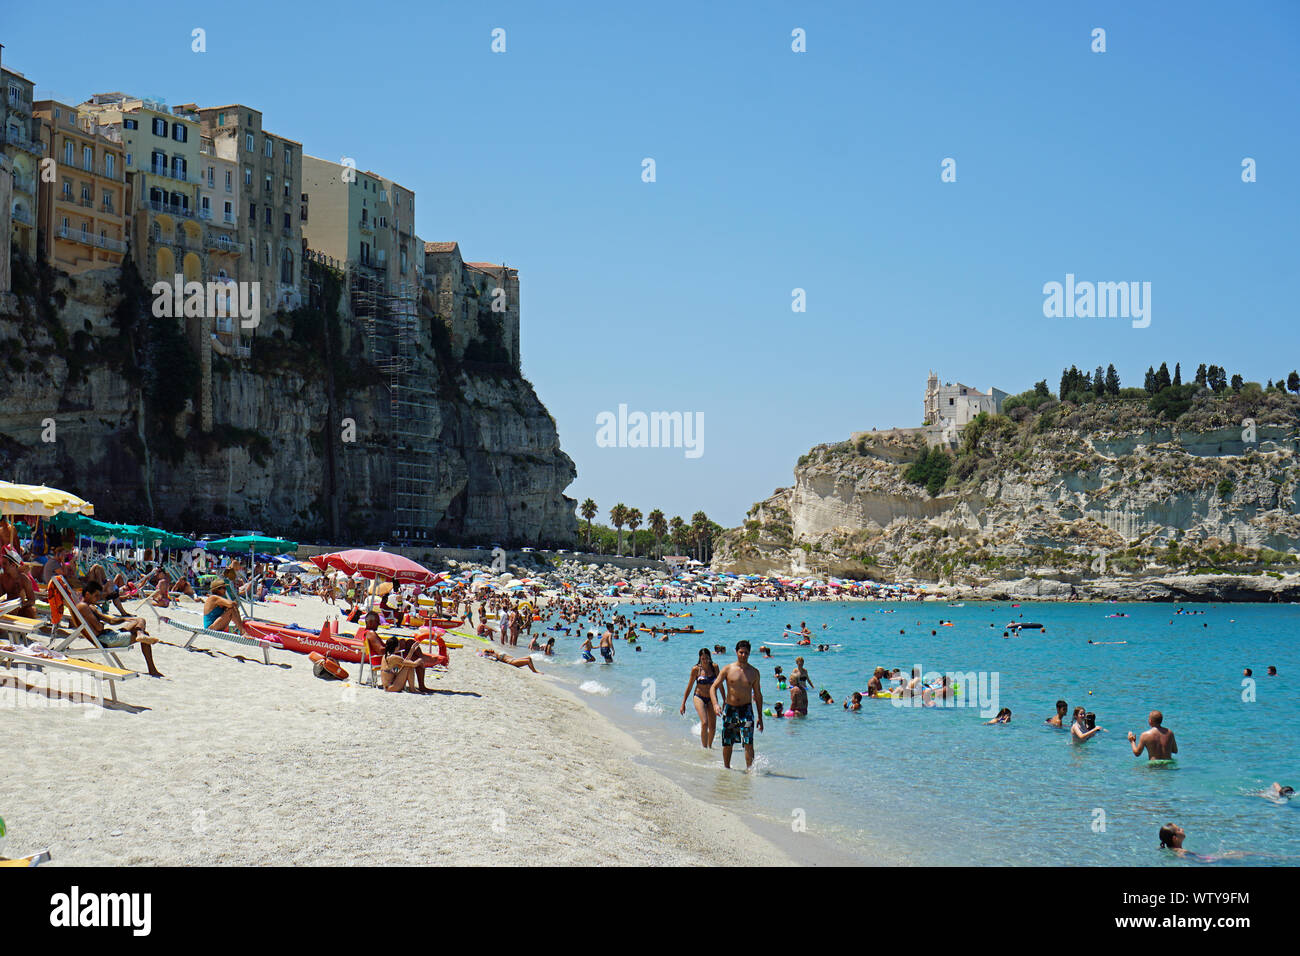 The public beach in Tropea, Calabria, Italy. View from north in August 2019, with the view of the hill with the Church of Santa Maria dell'Isola Stock Photo